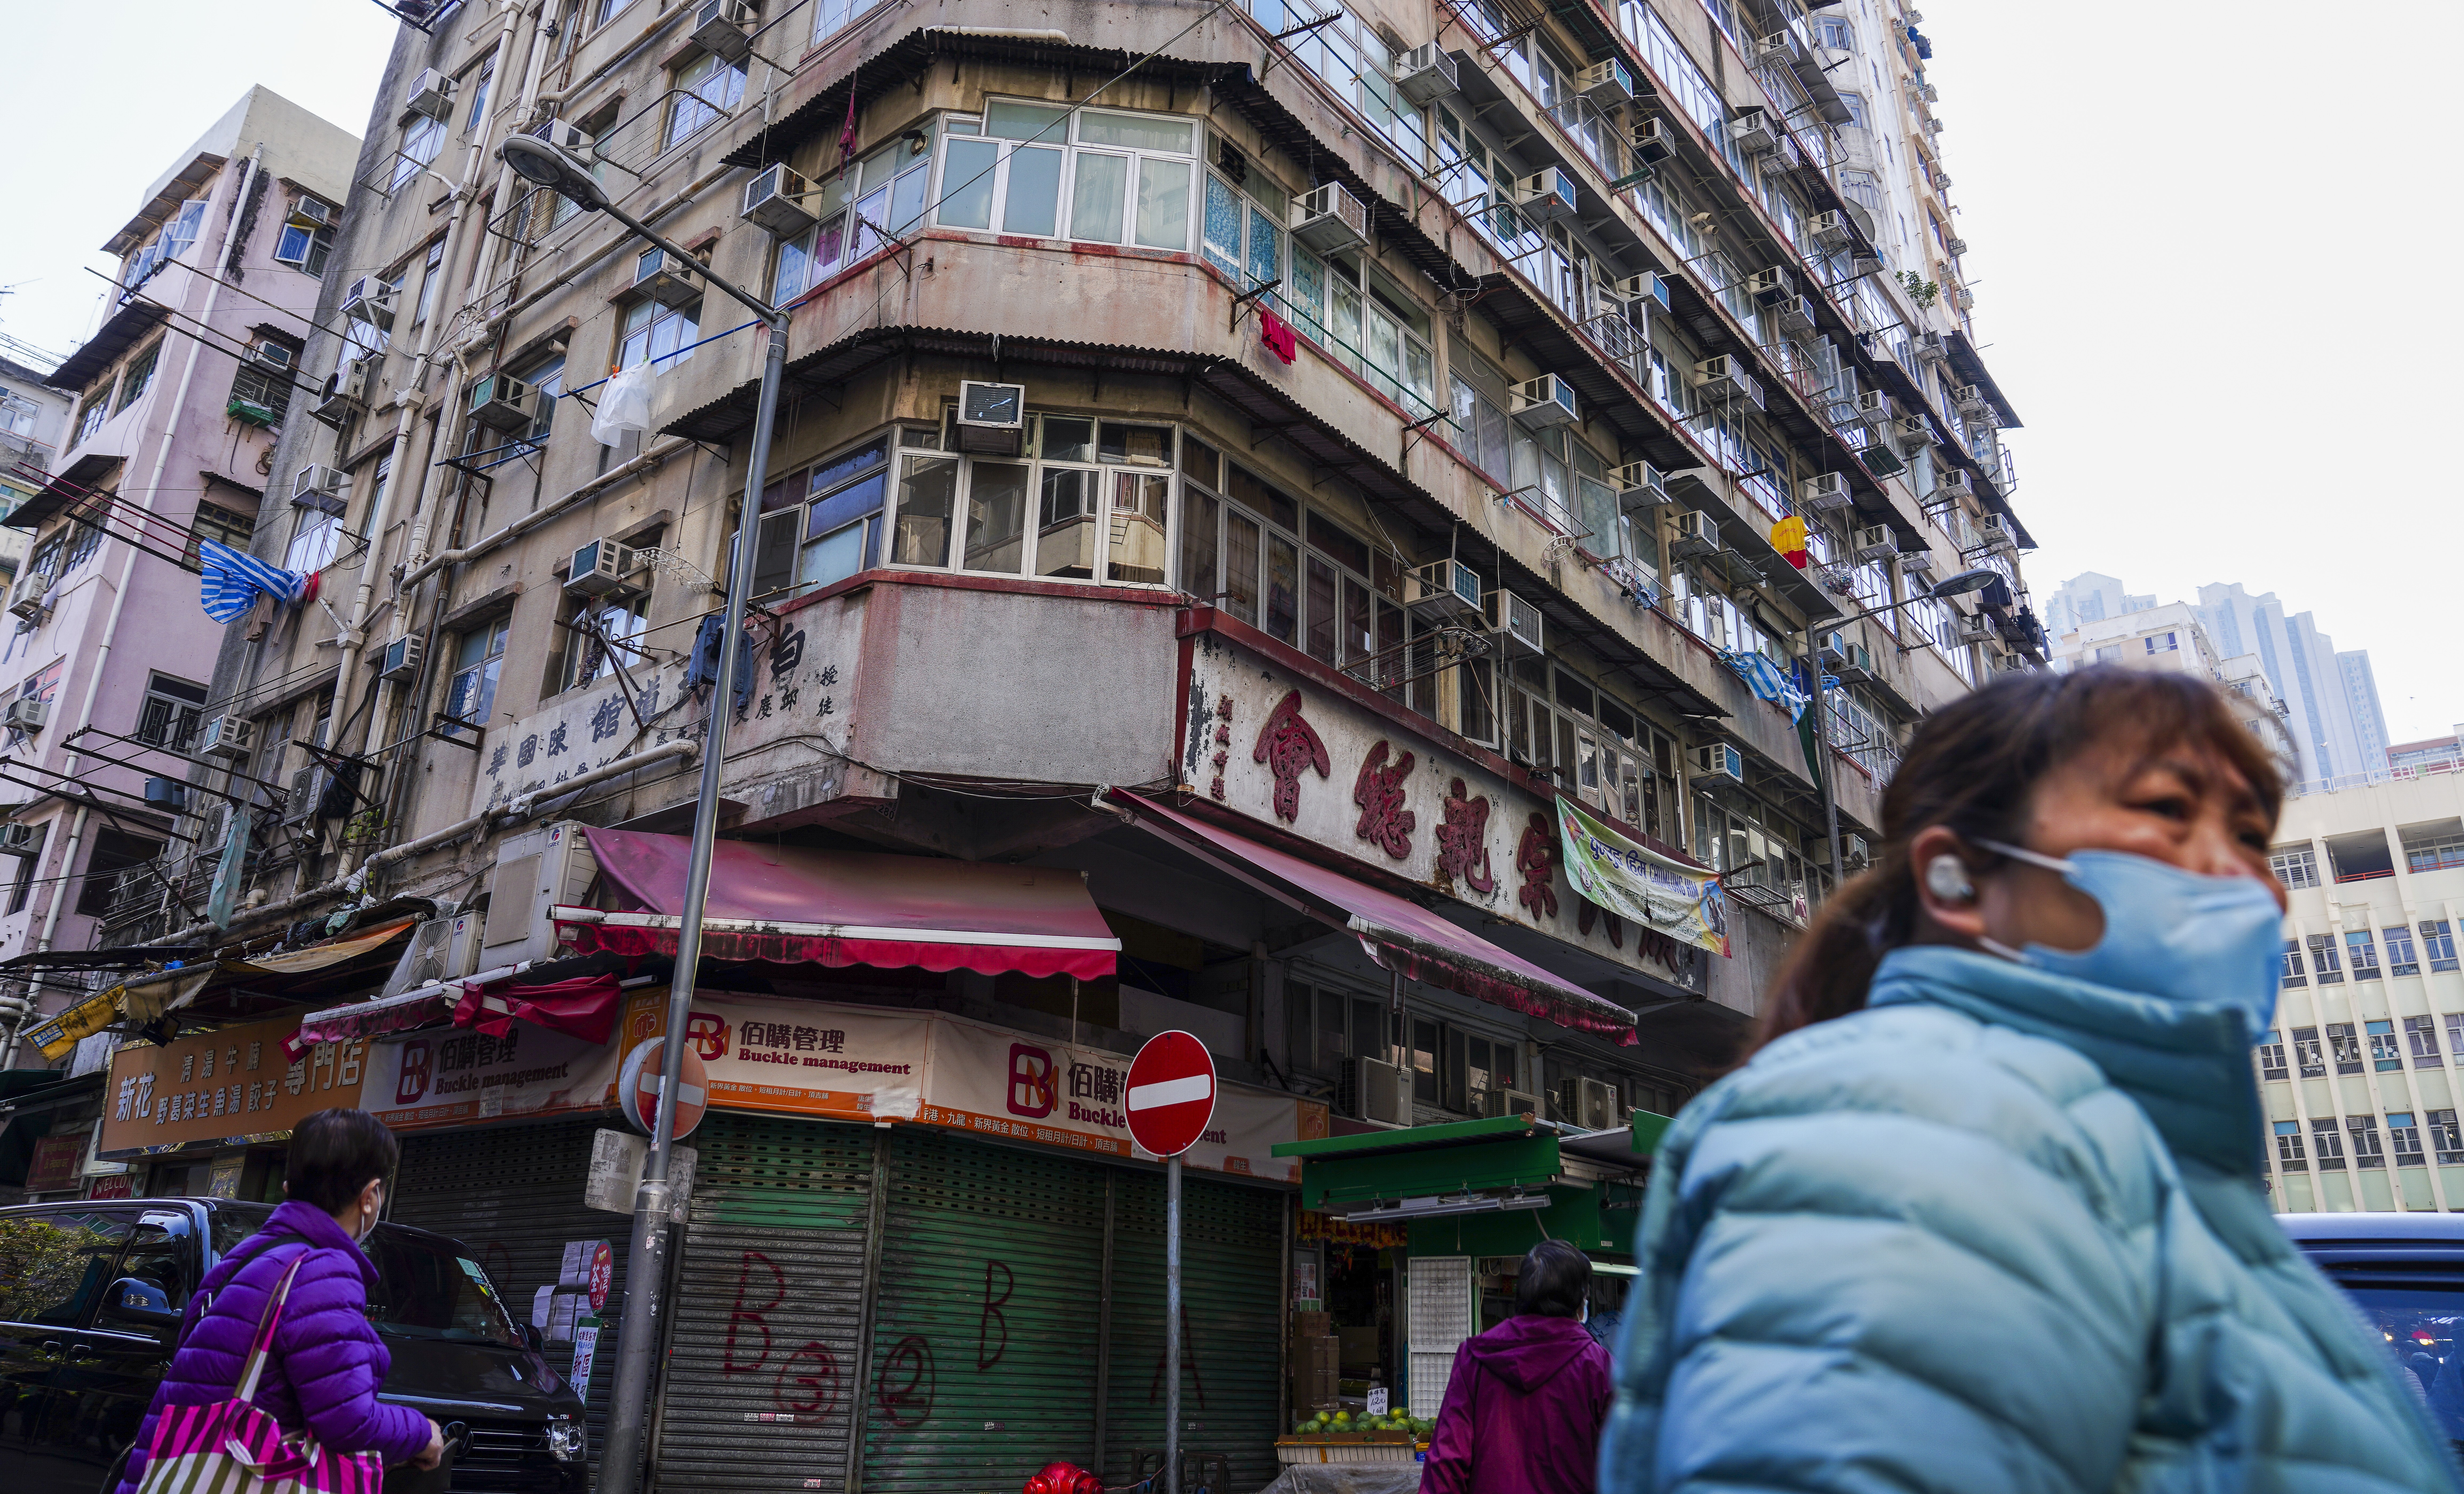 An old tenement building on Reclamation Street in Yau Ma Tei. Photo: Sam Tsang